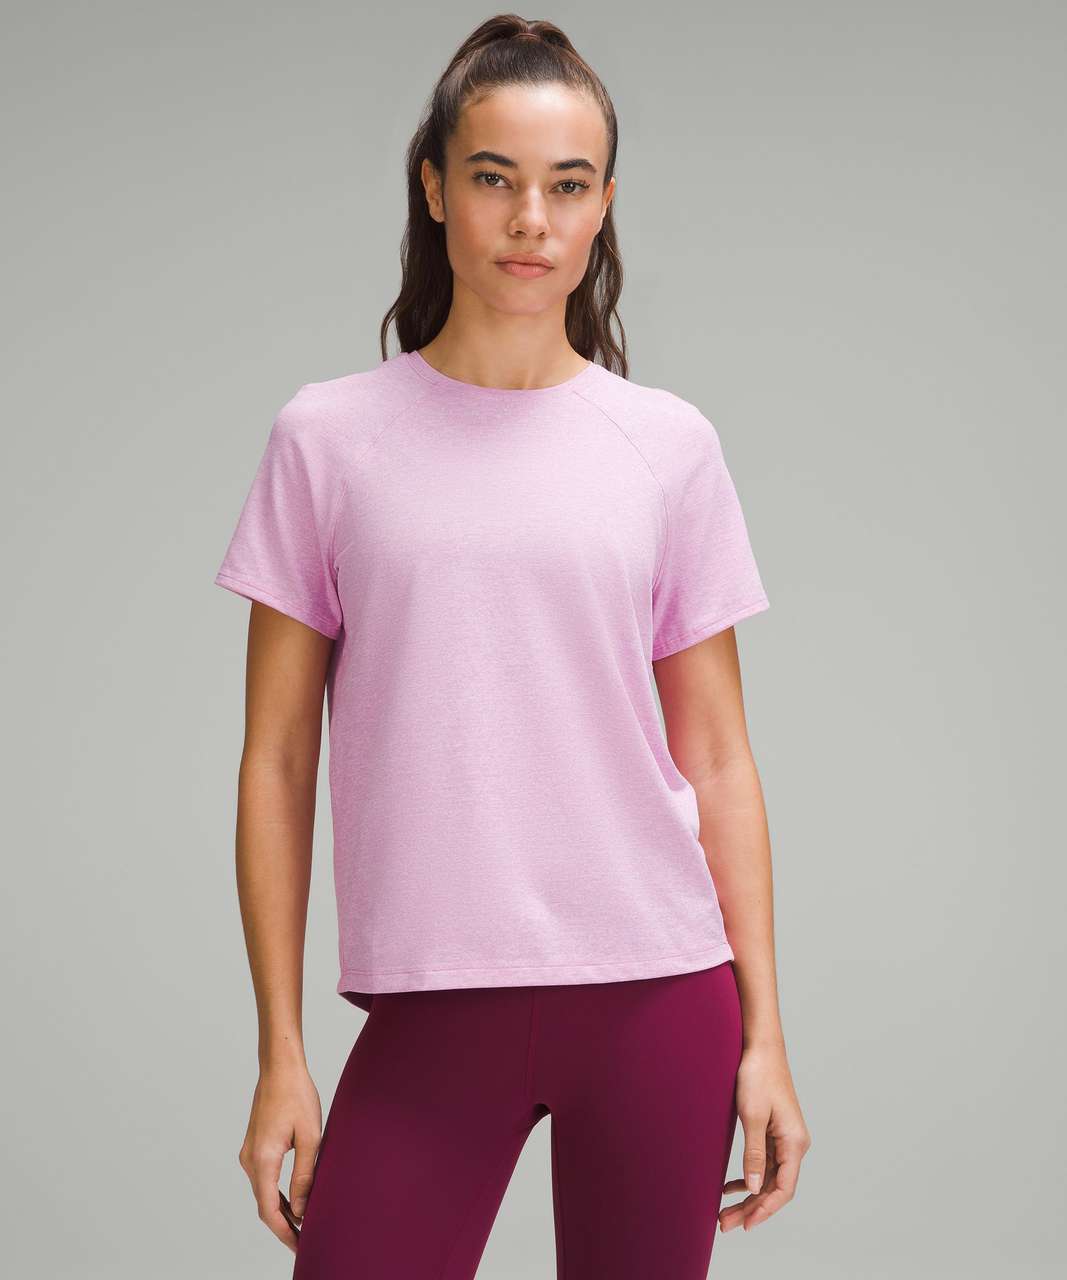 Replying to @skelton1981 outfit ideas to style washed mauve from @lulu, Lululemon